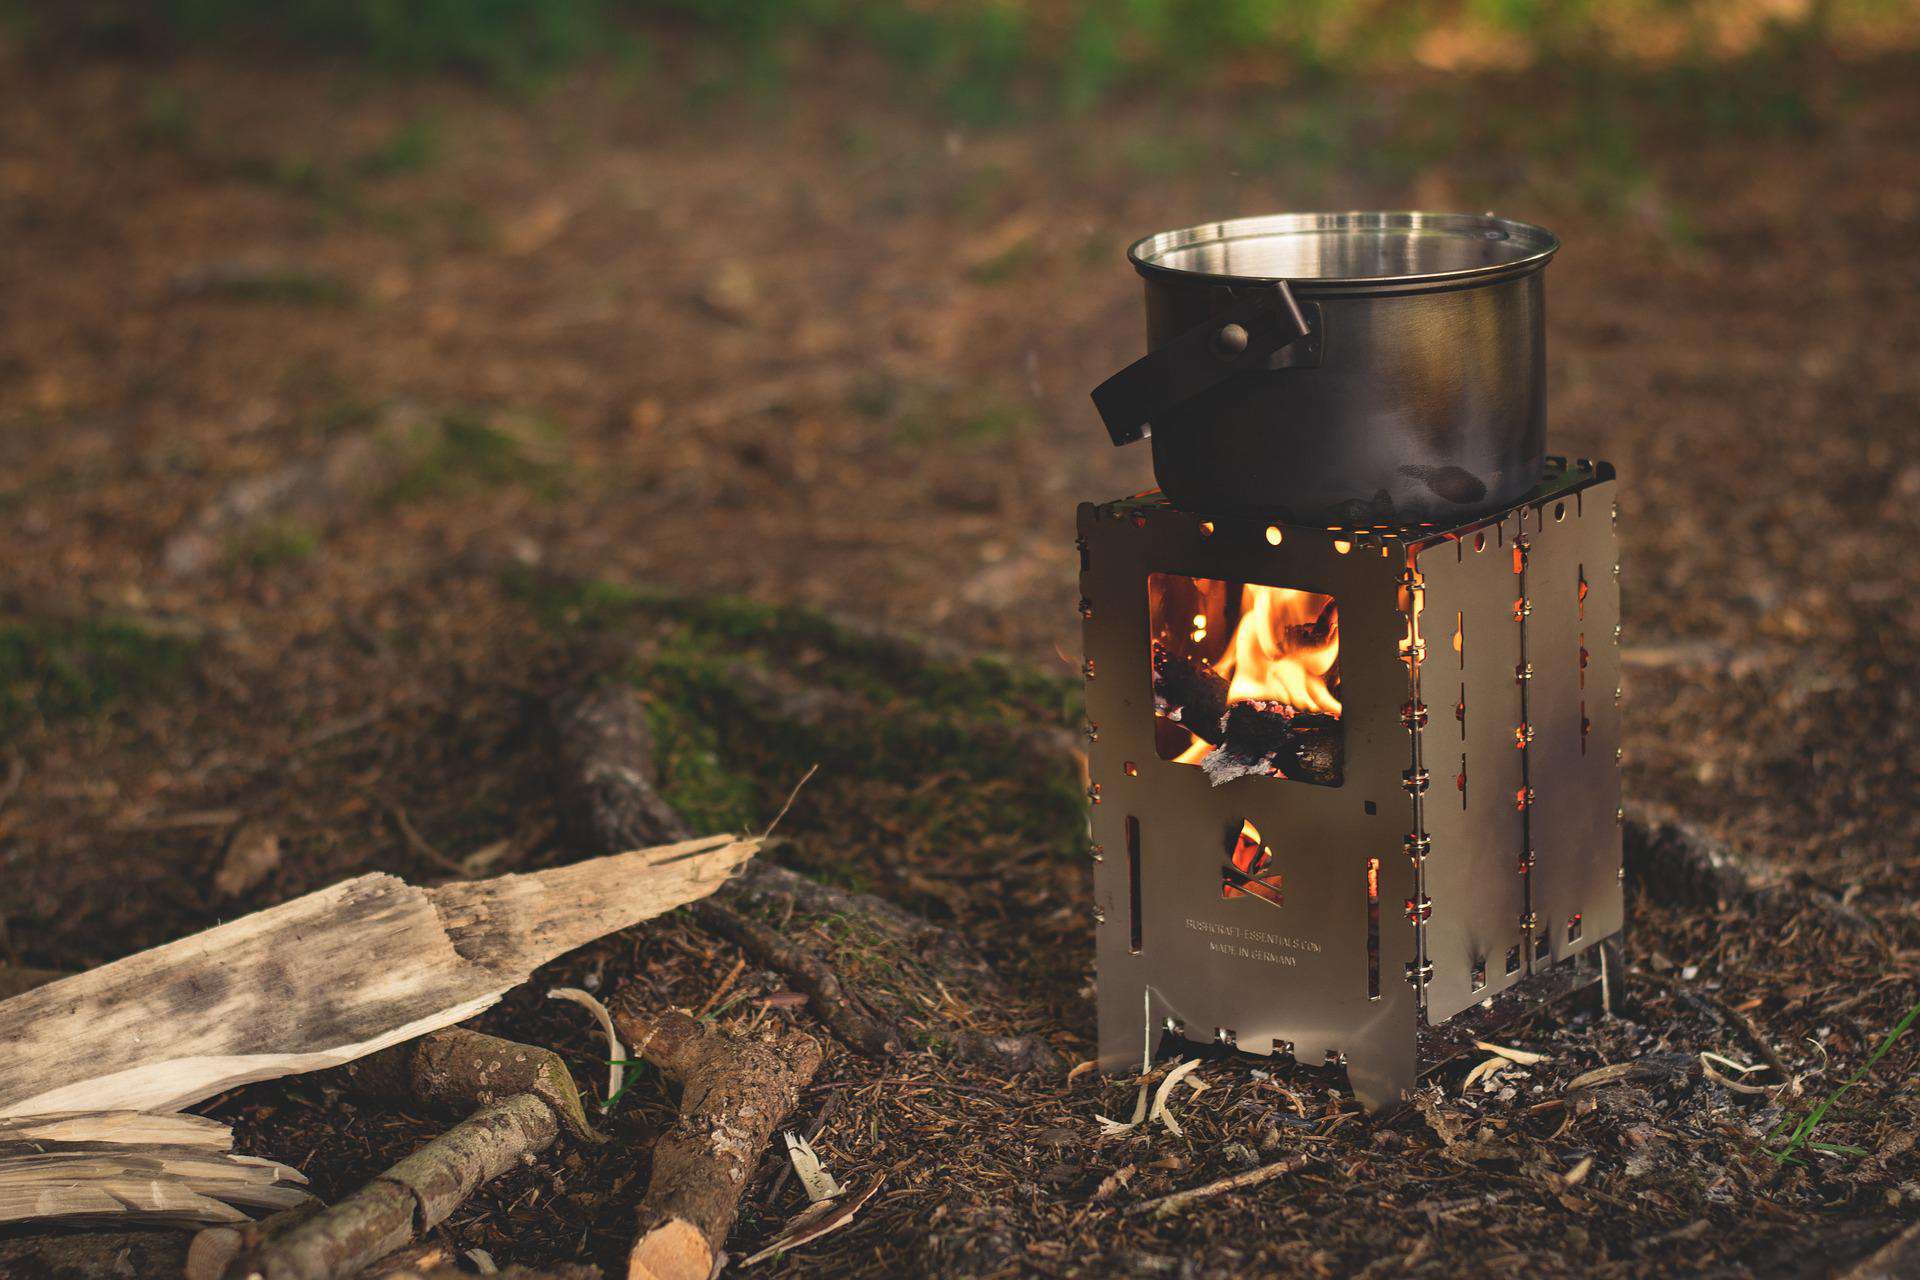 firebox camp stove used during disaster